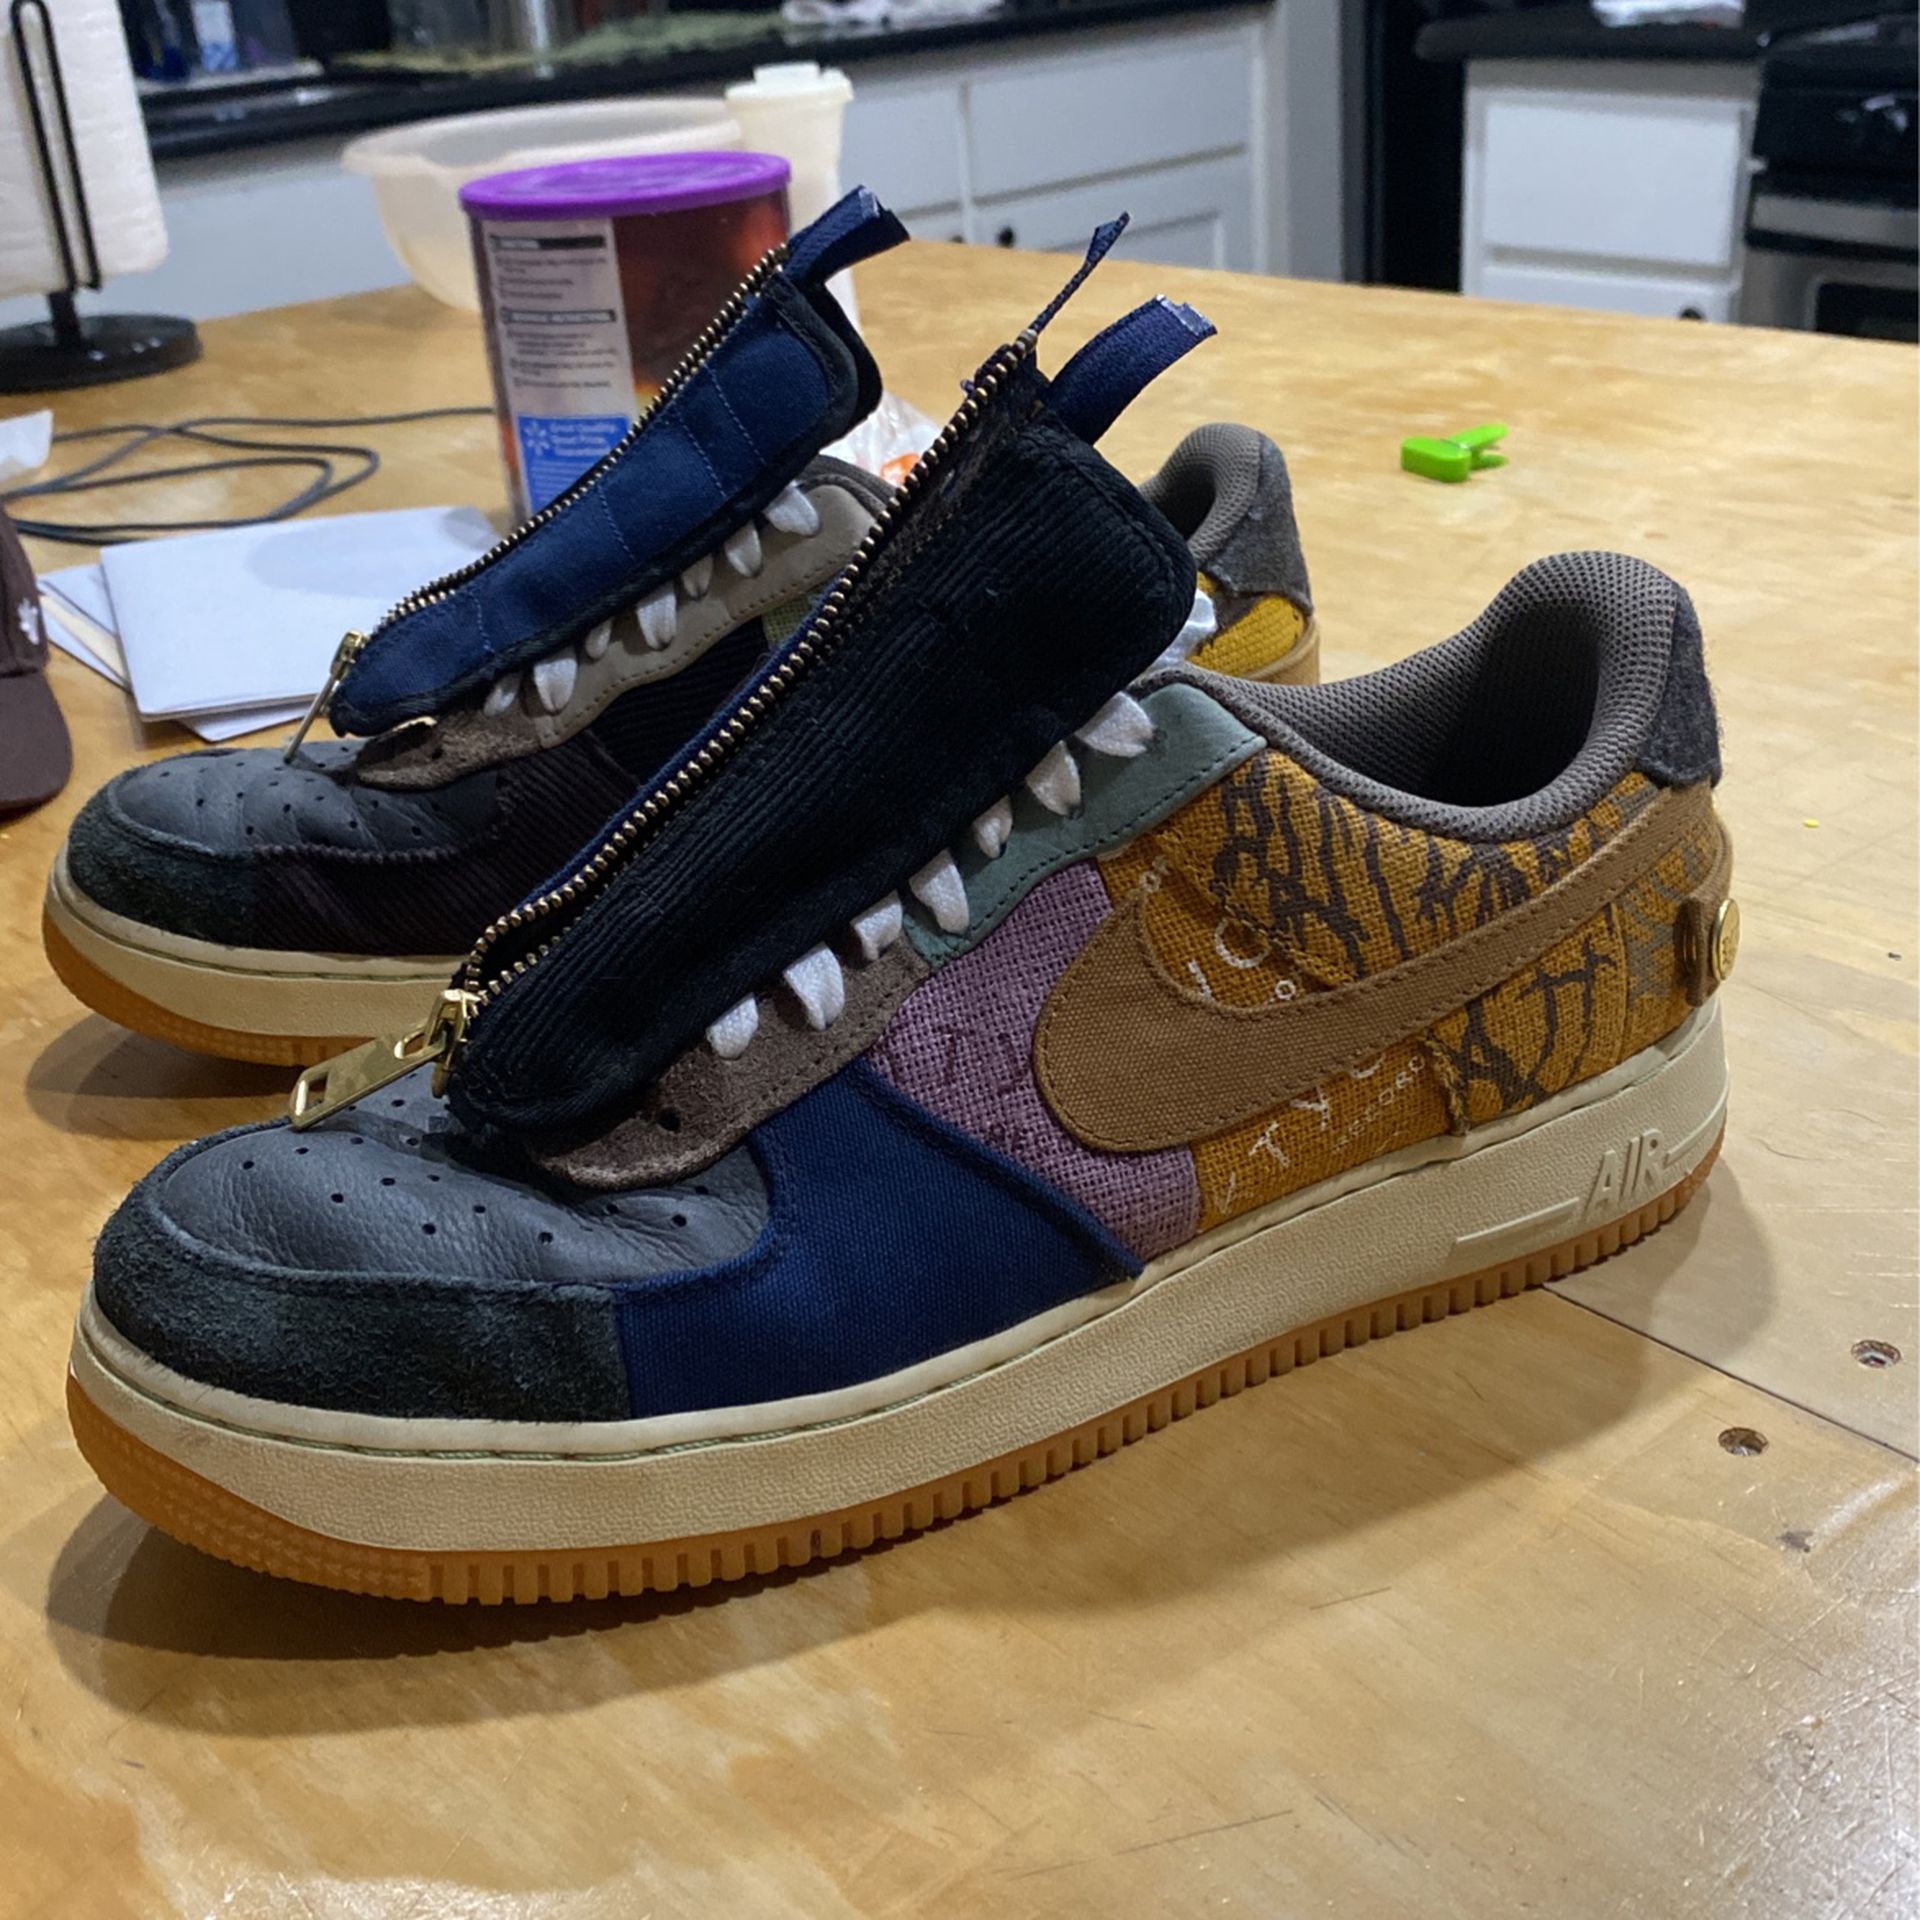 Nike air force one from goat for Sale in Ramona, CA - OfferUp